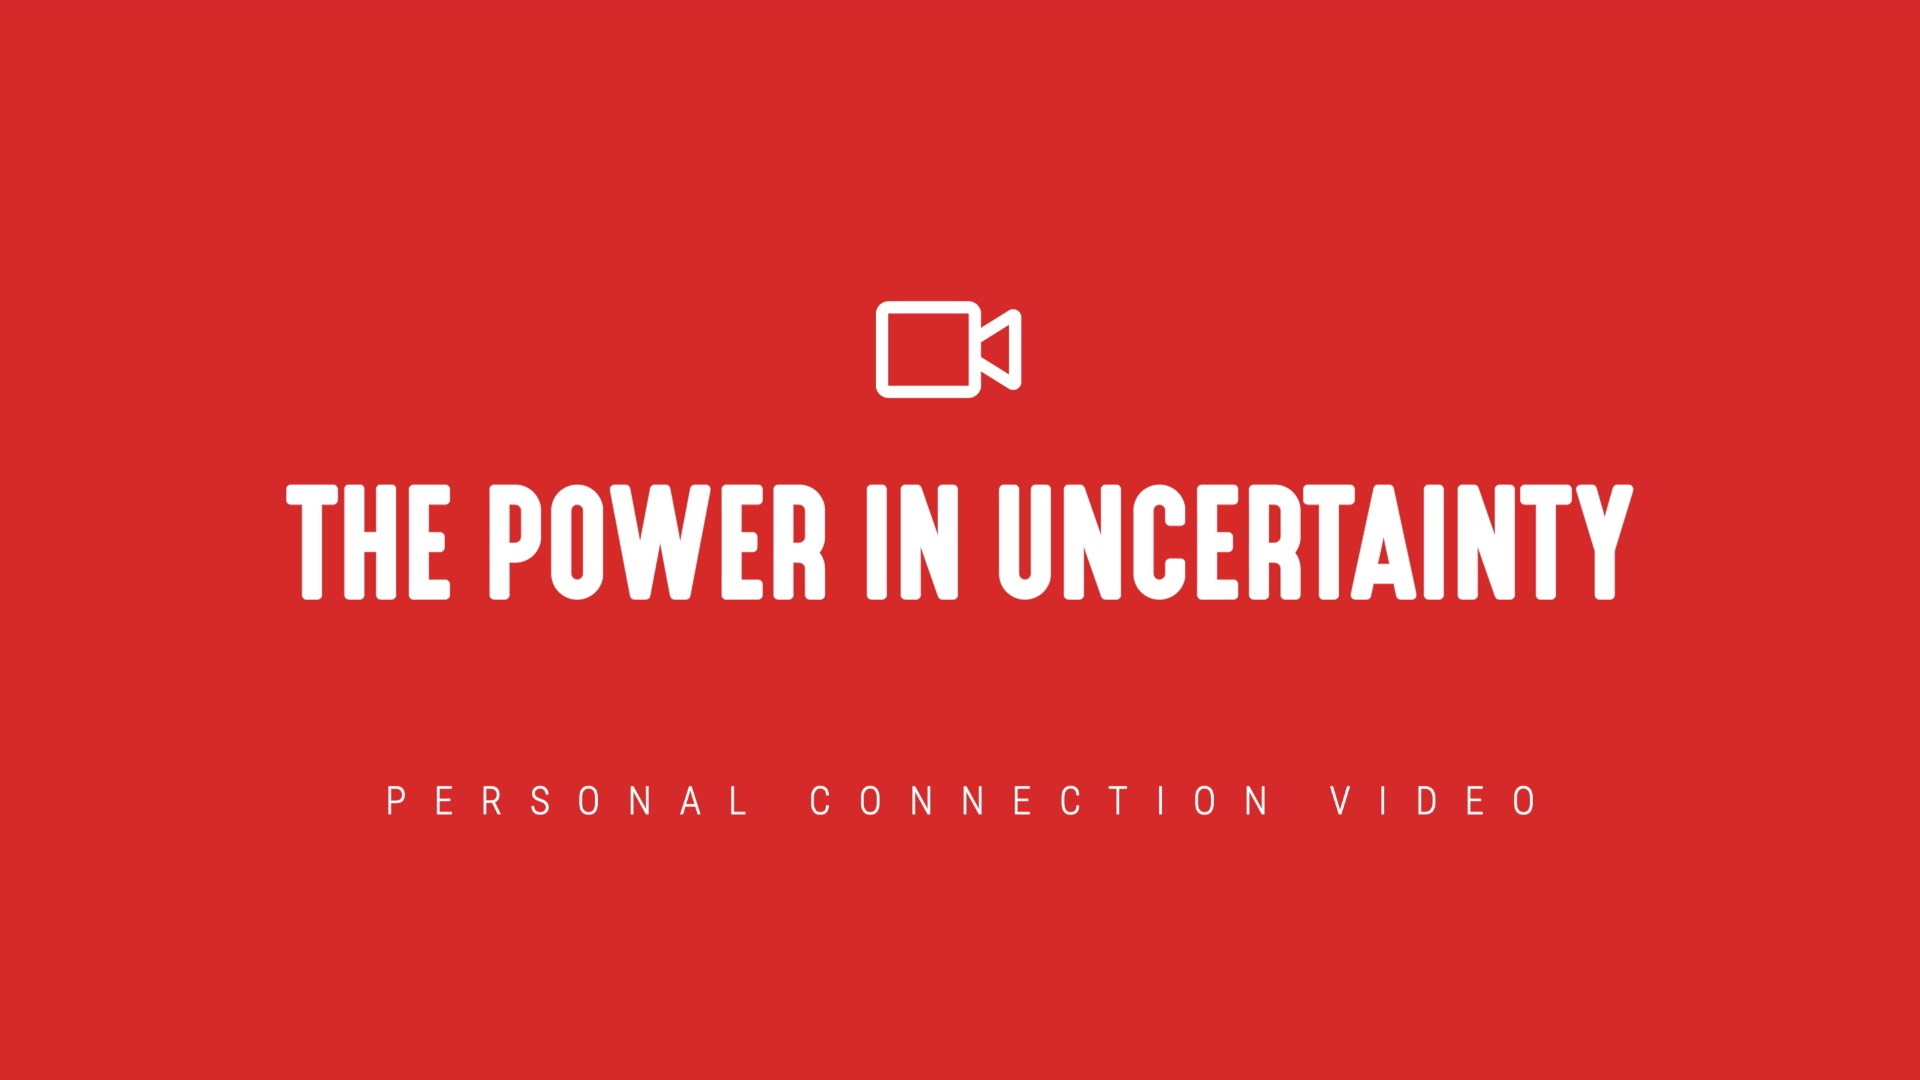 [NEW] Personal Connection Videos | The Power in Uncertainty